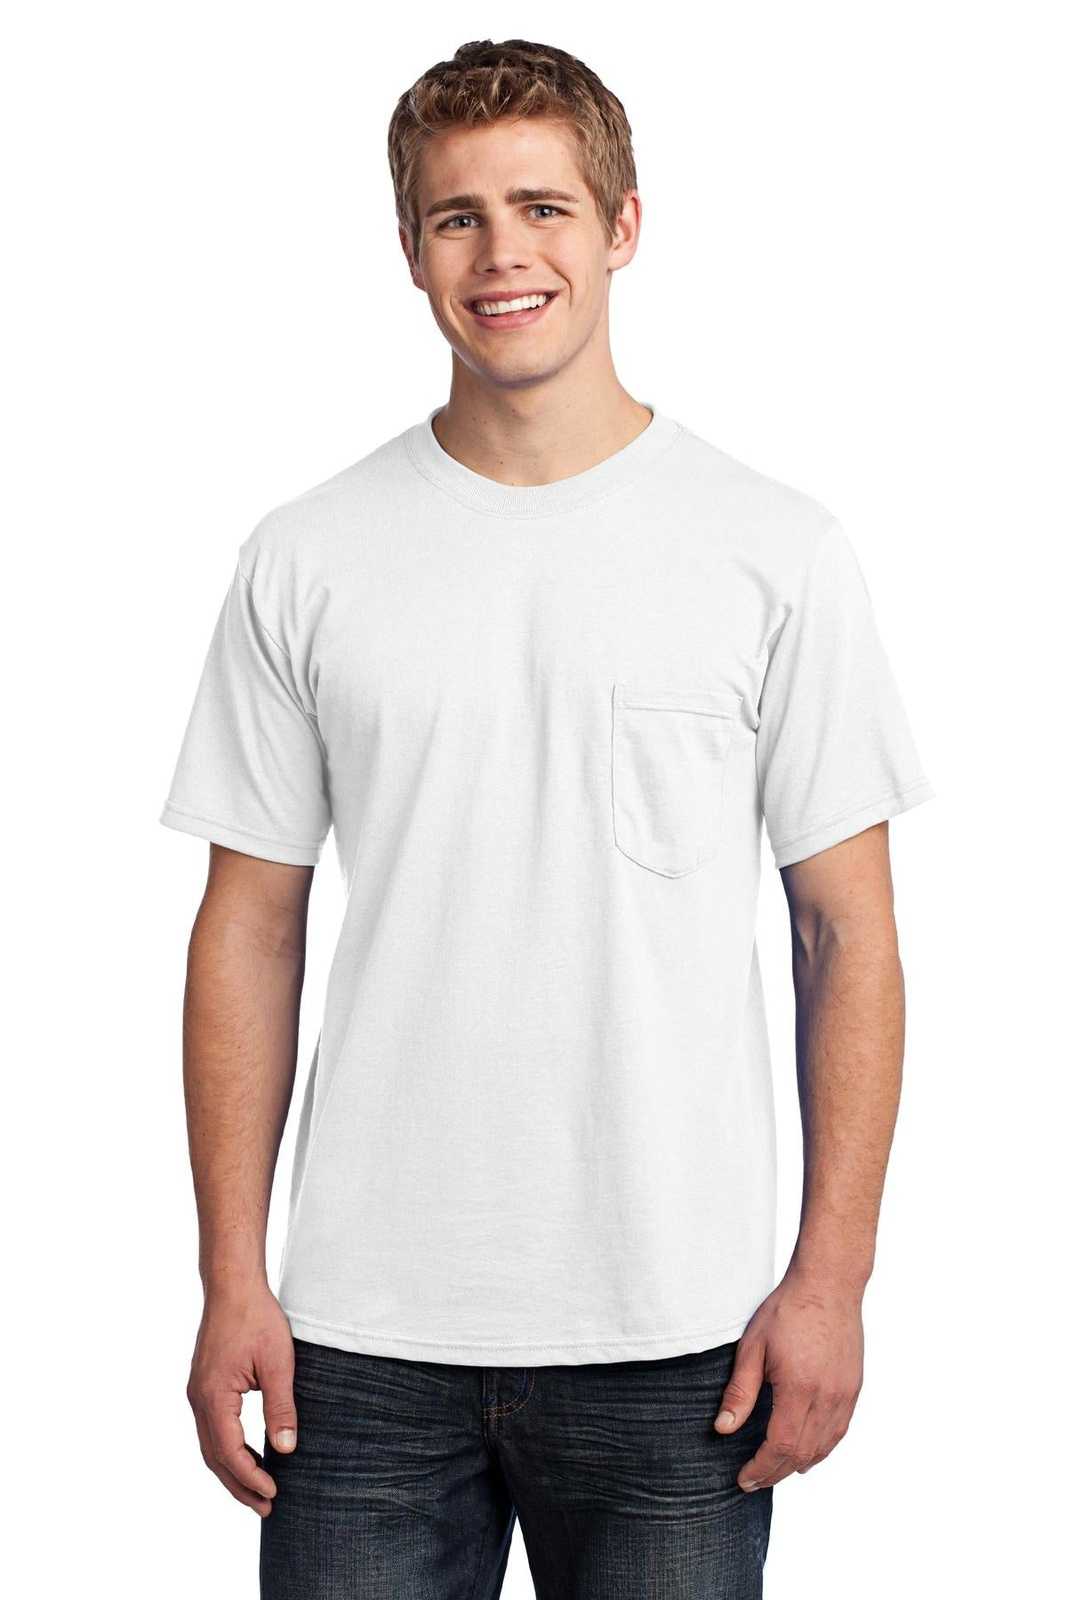 Port & Company USA100P All-American Pocket Tee - White - HIT a Double - 1